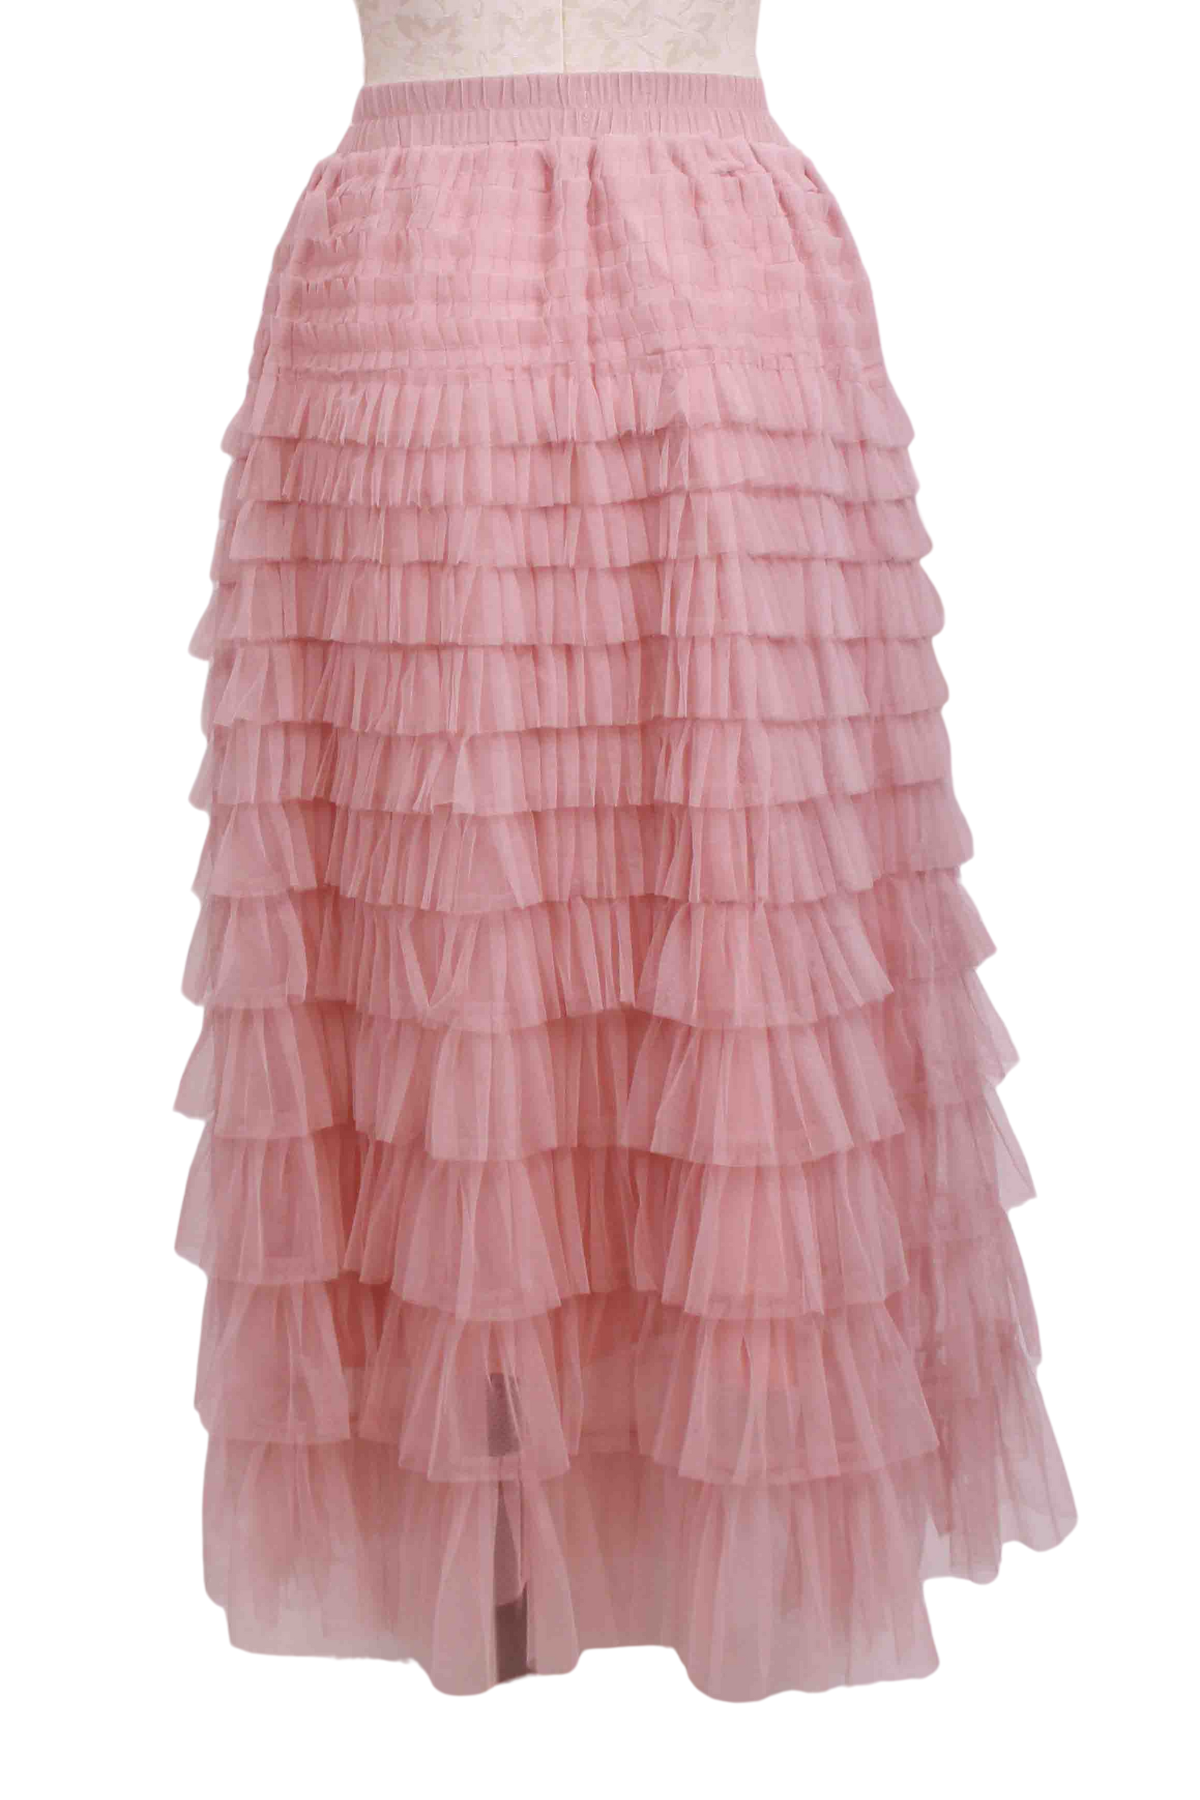 back view of Pink Tulle Layered Midi Skirt by Apricot